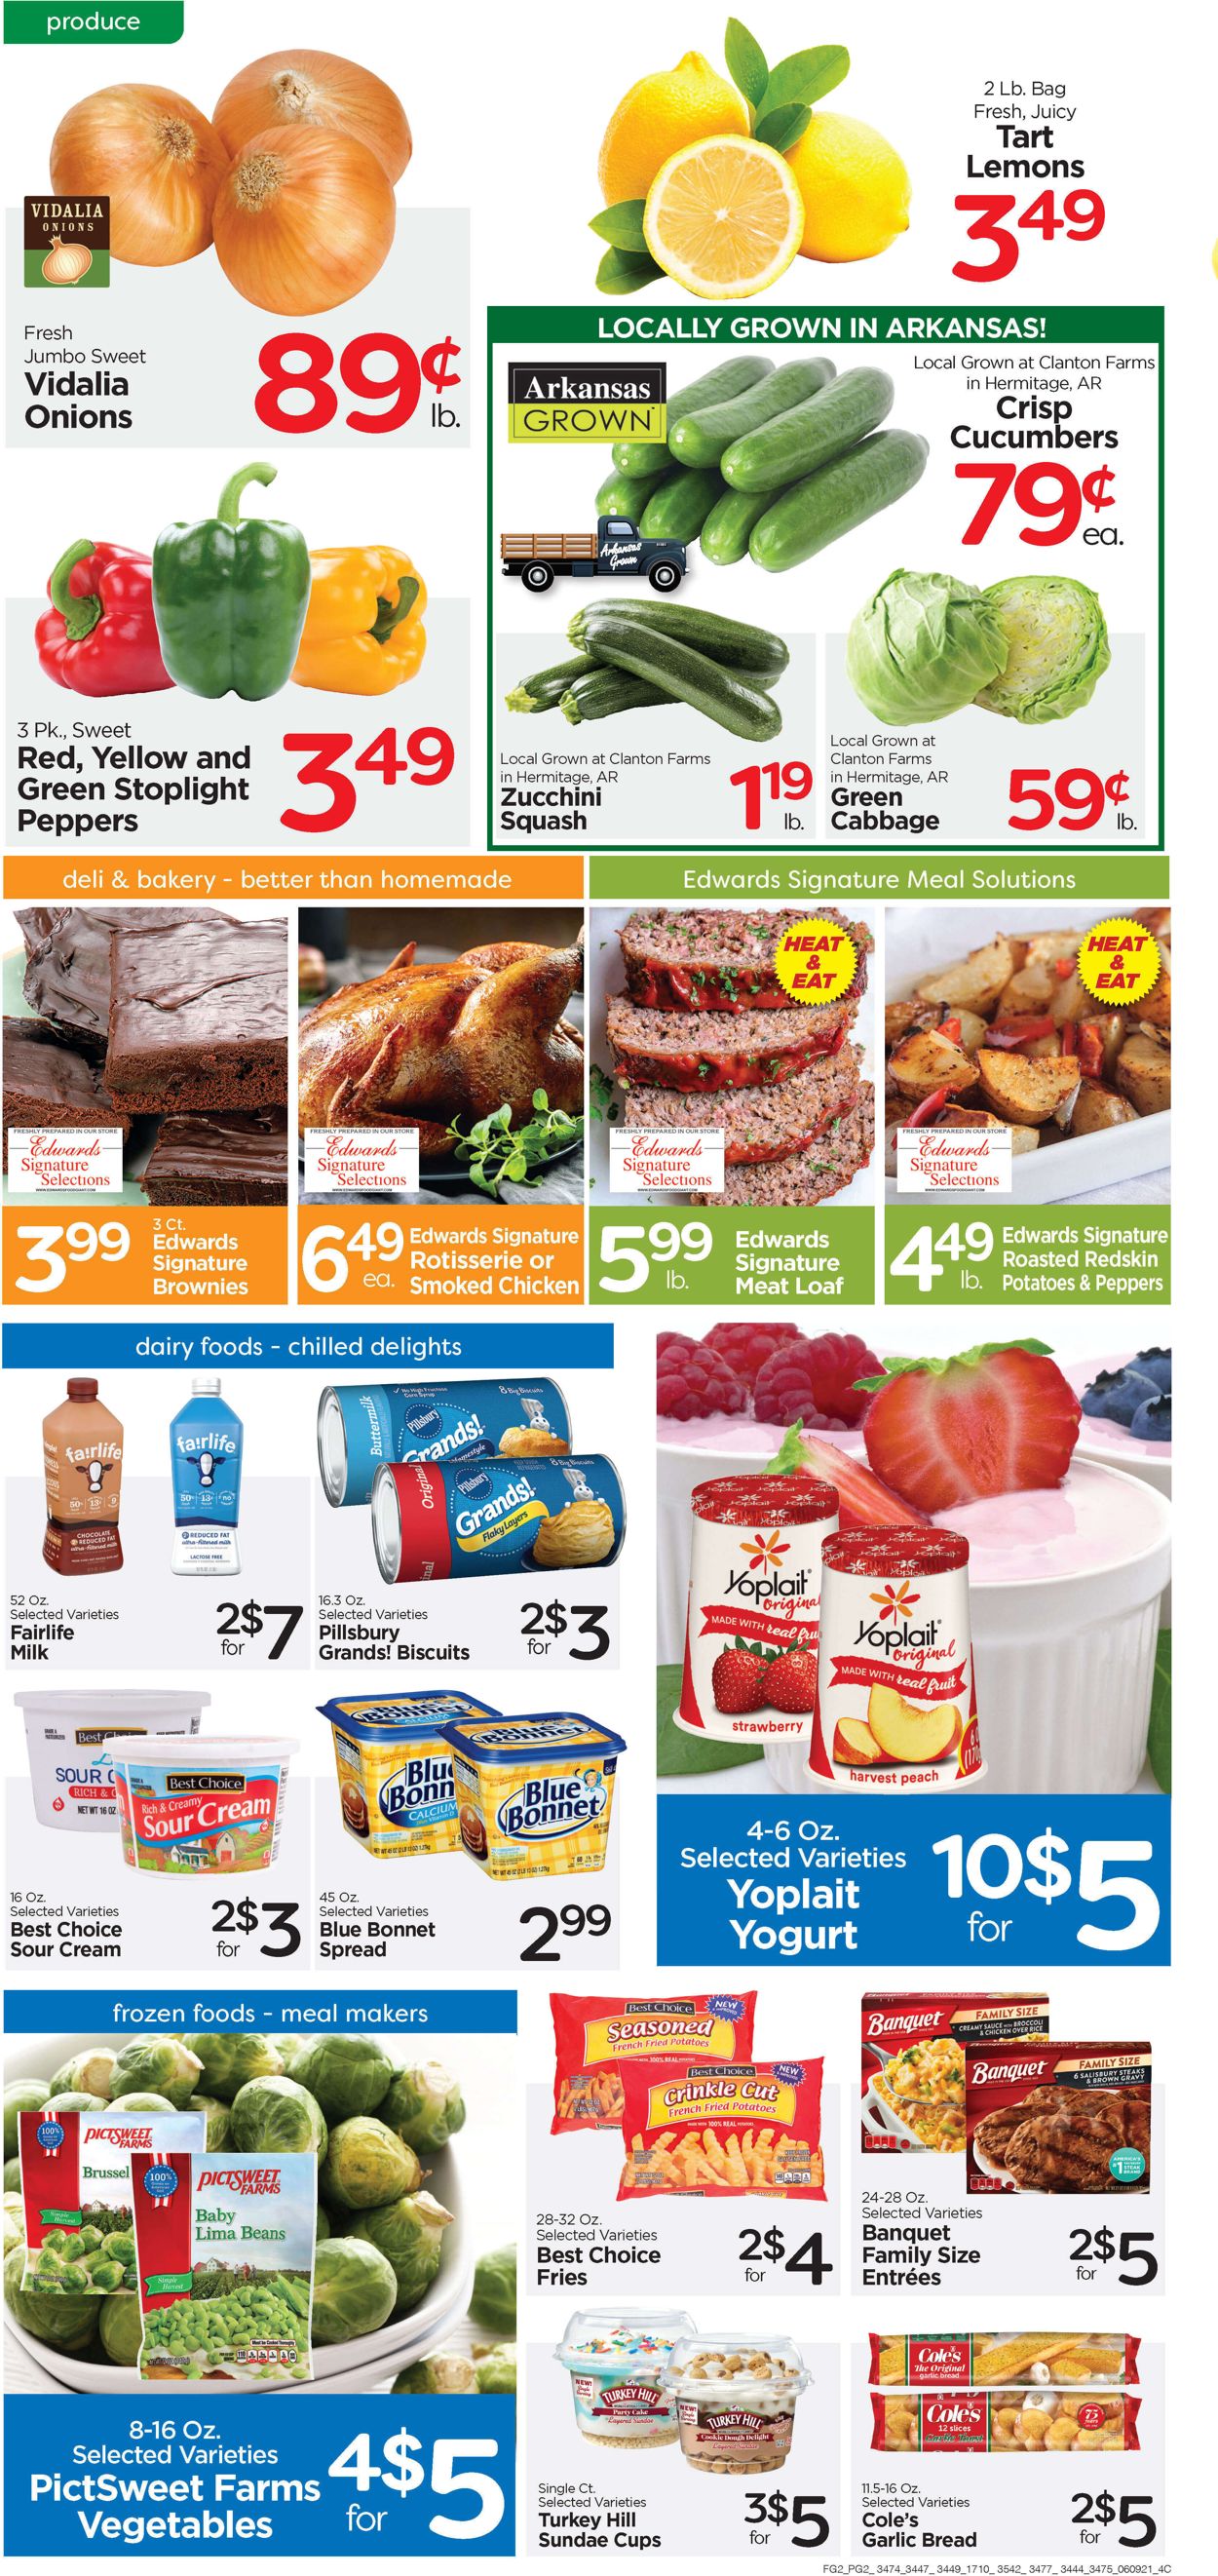 Catalogue Edwards Food Giant from 06/09/2021